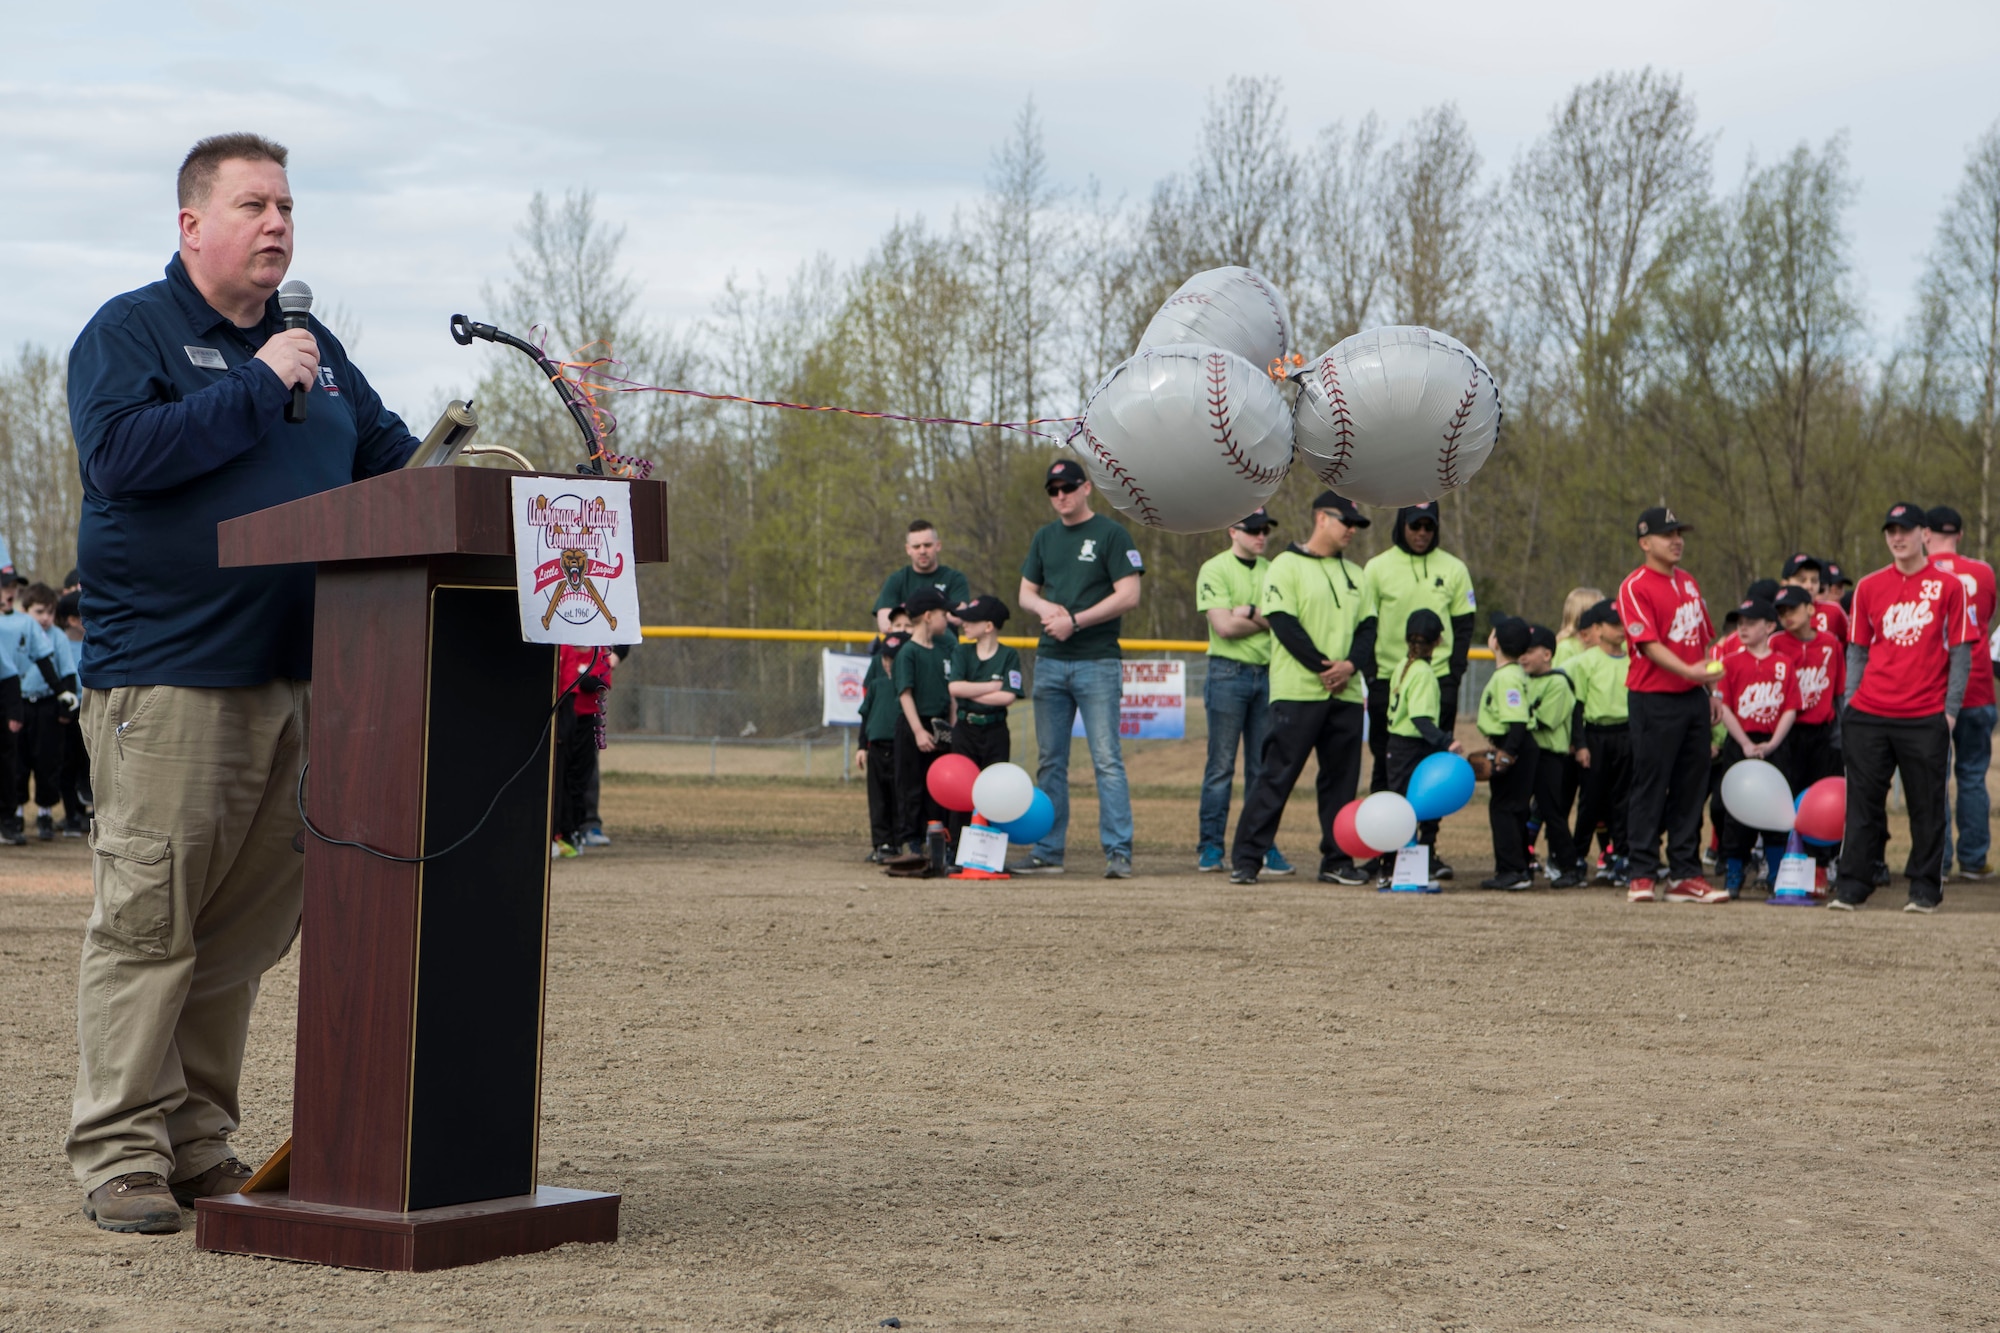 Paul Caron, Joint Base Elmendorf-Richardson Youth Sports director, makes introductions during the Little League opening day ceremony at JBER, Alaska, May 12, 2018. JBER coaches are trained on topics such as the psychology of coaching youth sports, communication, child abuse, injury prevention, and nutrition and hydration, as well as skills and drills.